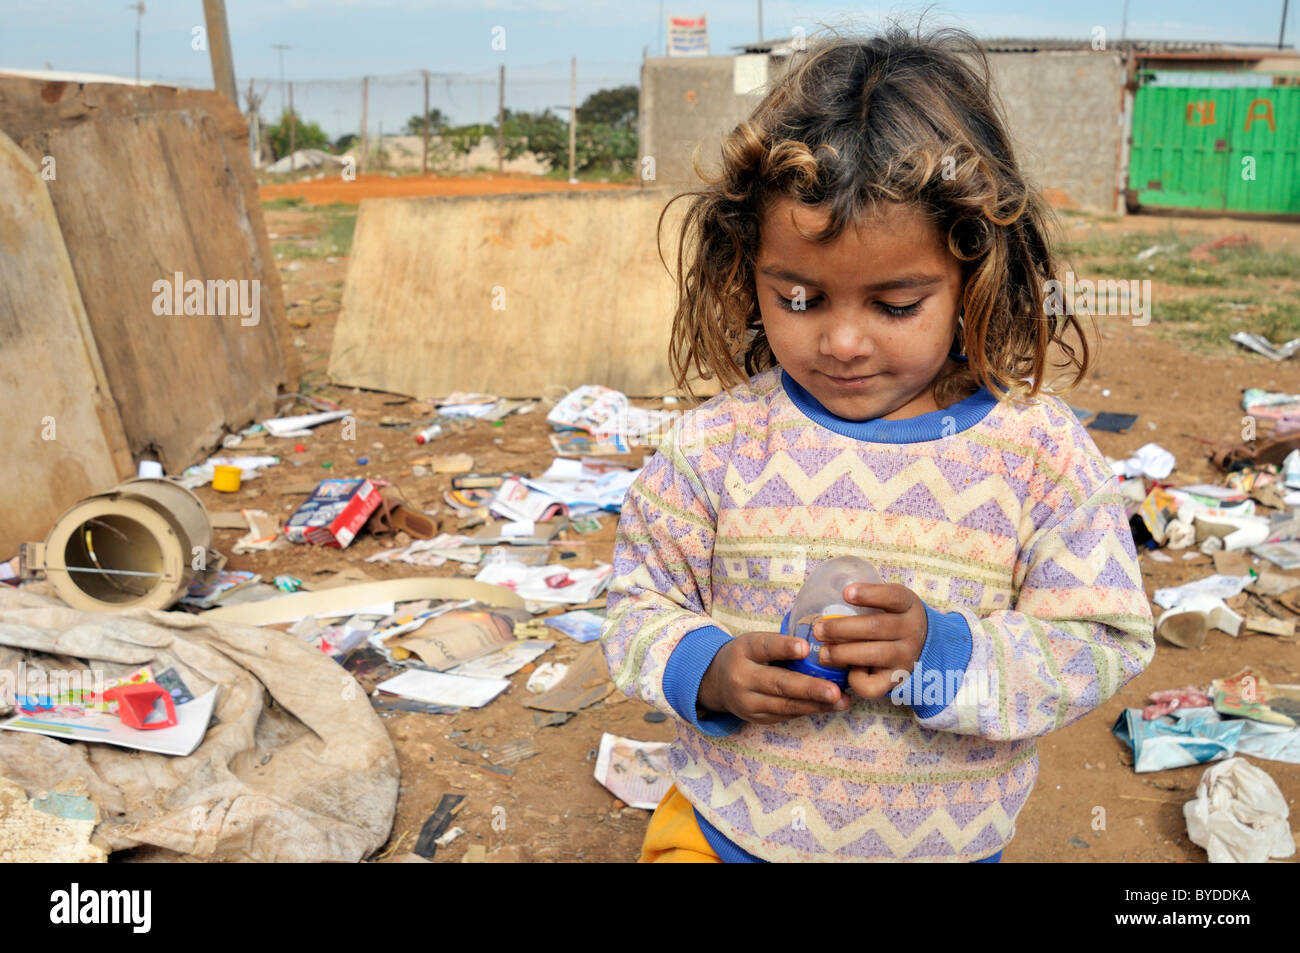 Girl, 8, playing with a toy she found at the informal dump outside her house, her family lives by collecting, separating and Stock Photo